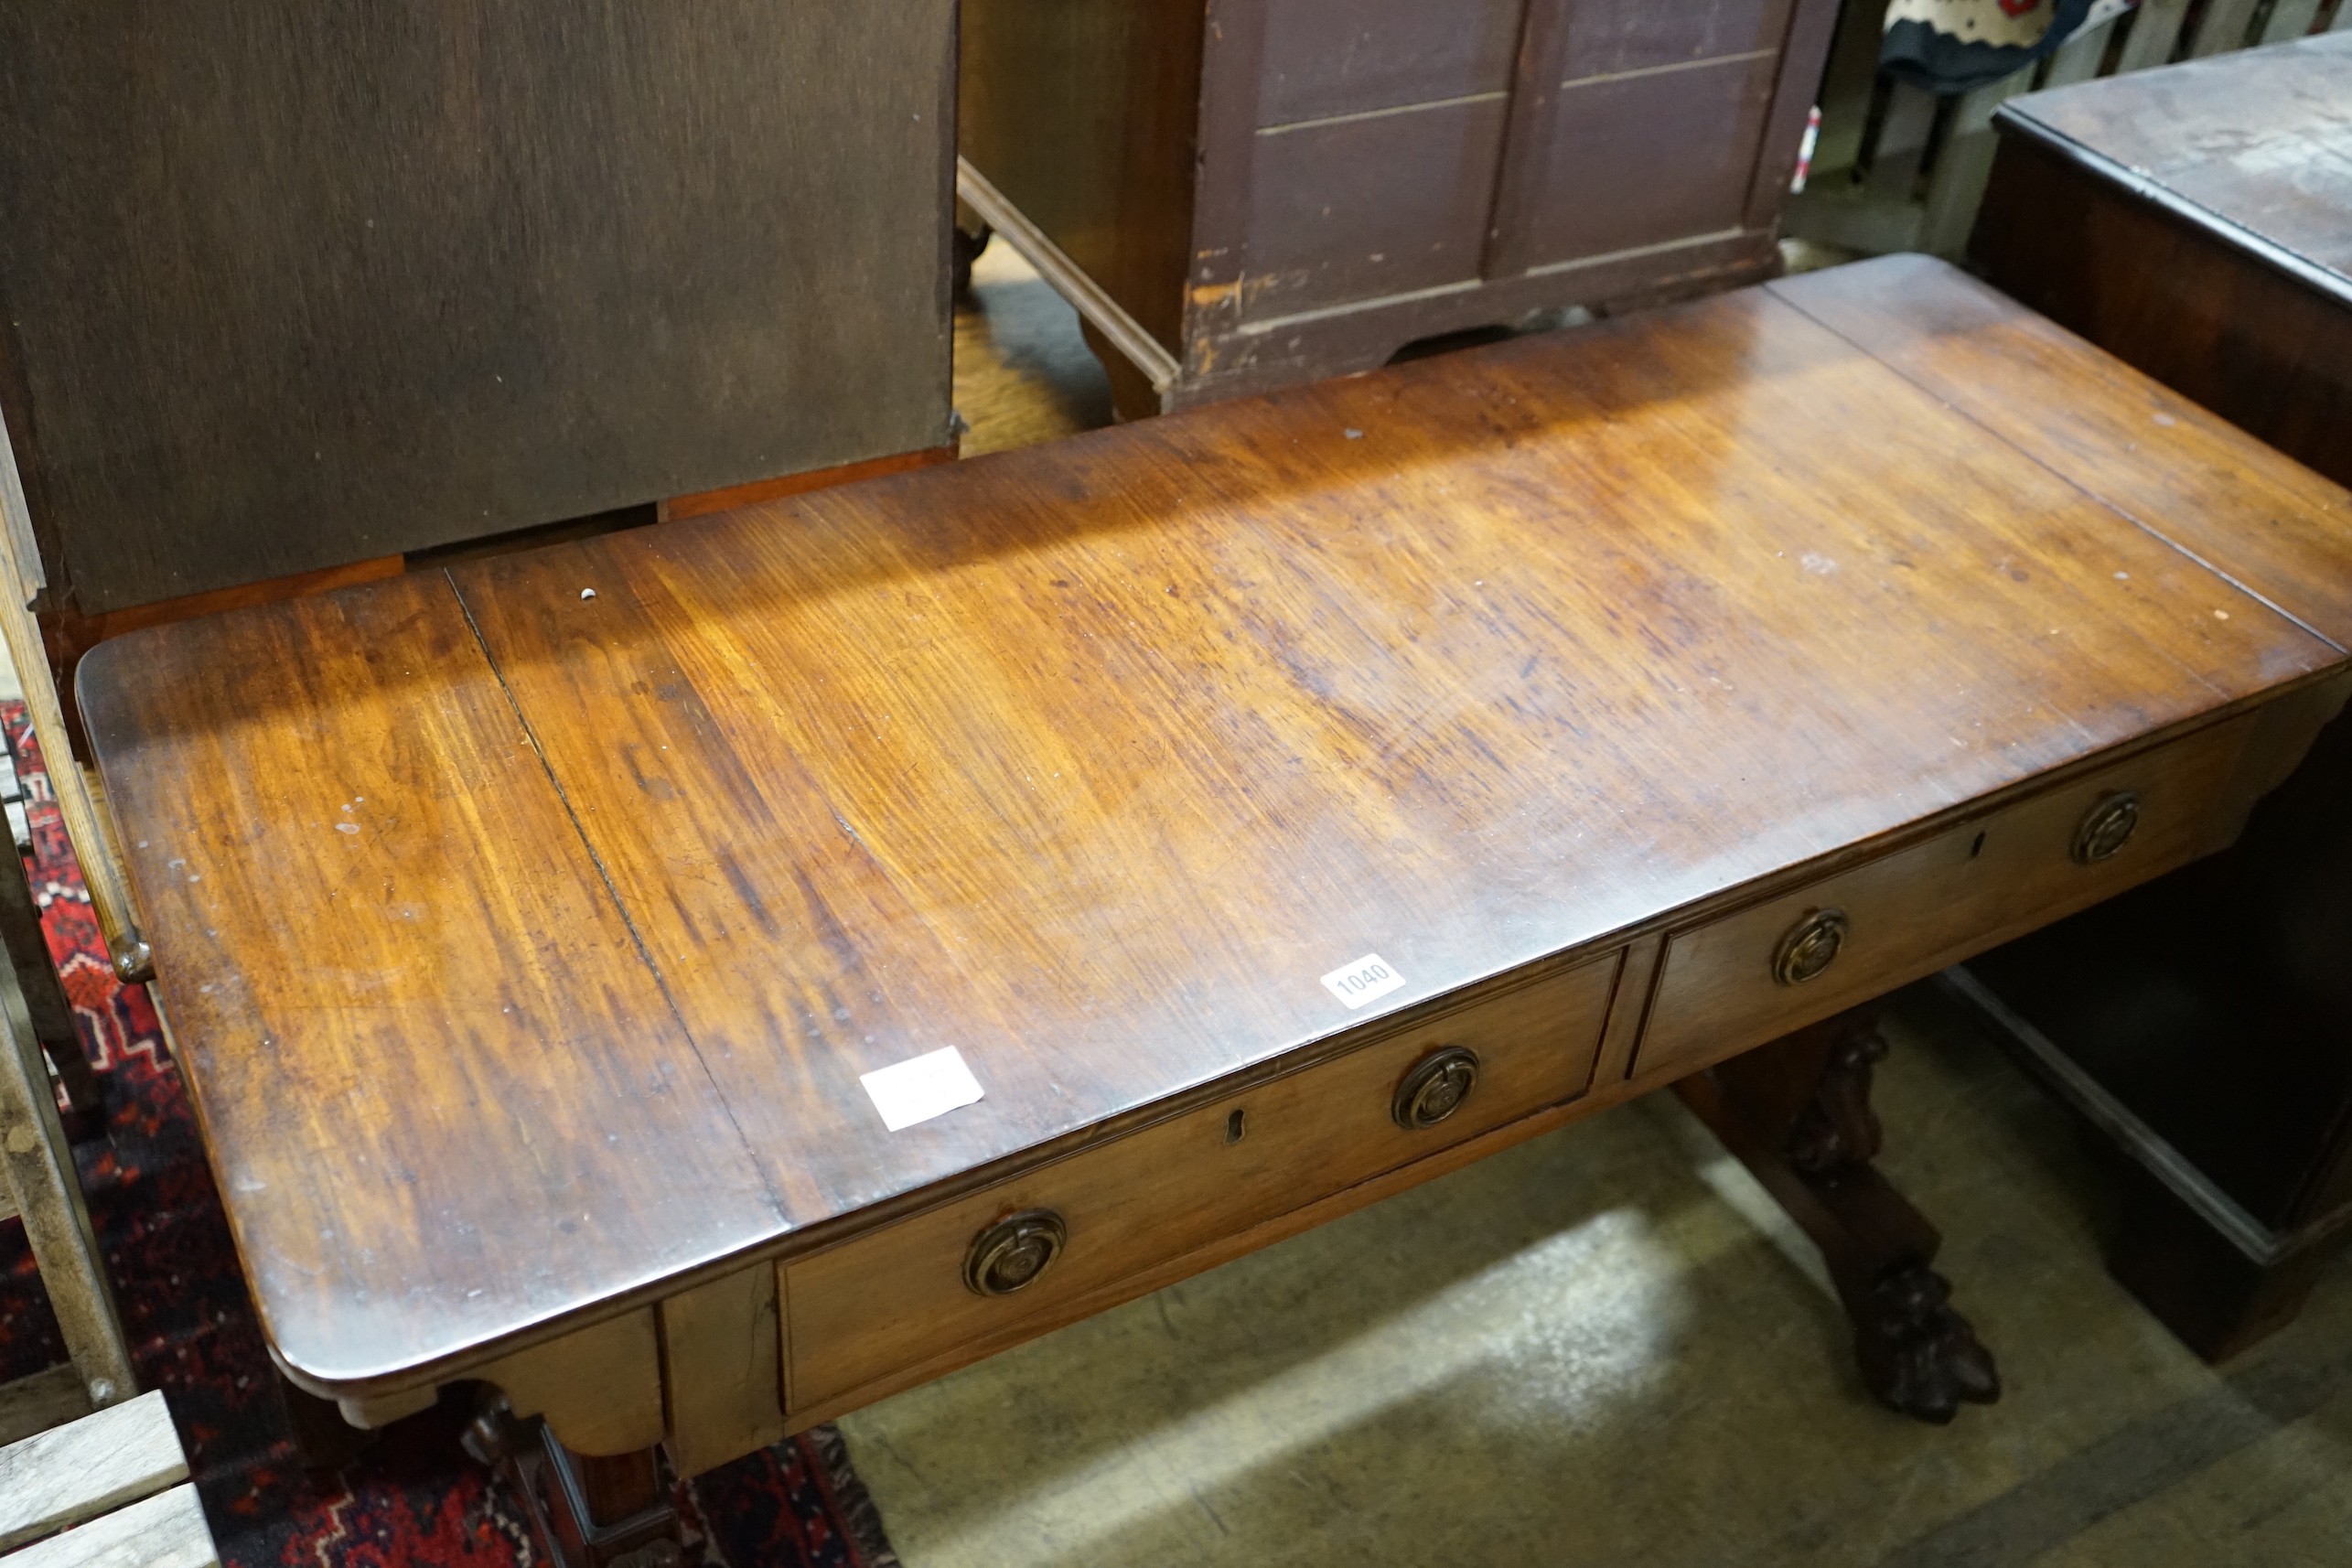 A Victorian rosewood centre table, width 122cm, depth 48cm, height 70cm